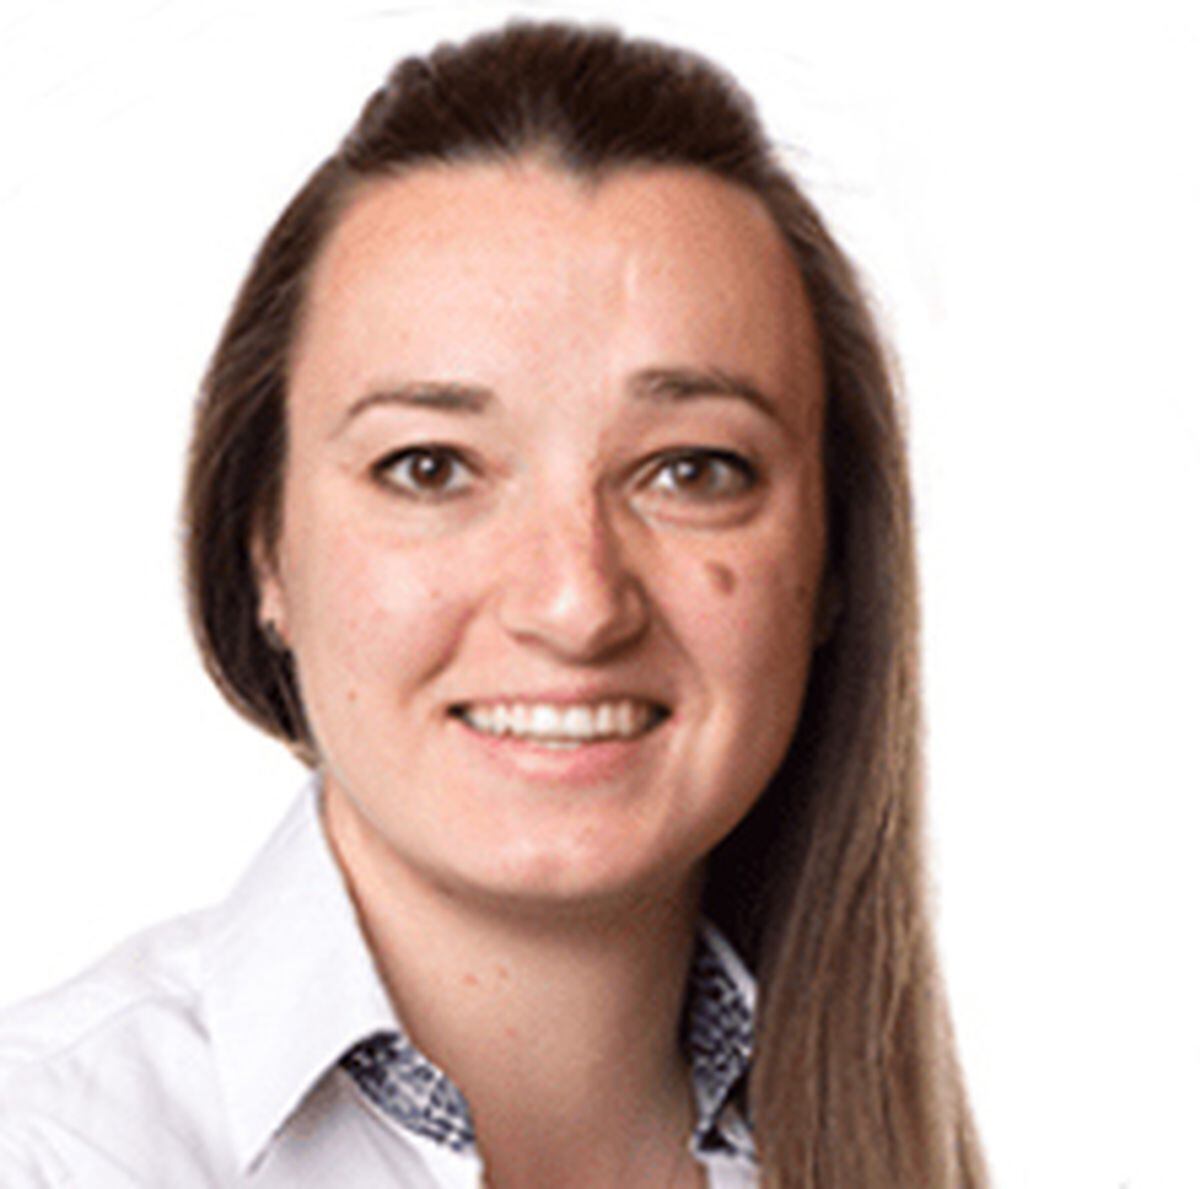 Lientjie Colahan is technical sales support at Lallemand Animal Nutrition.